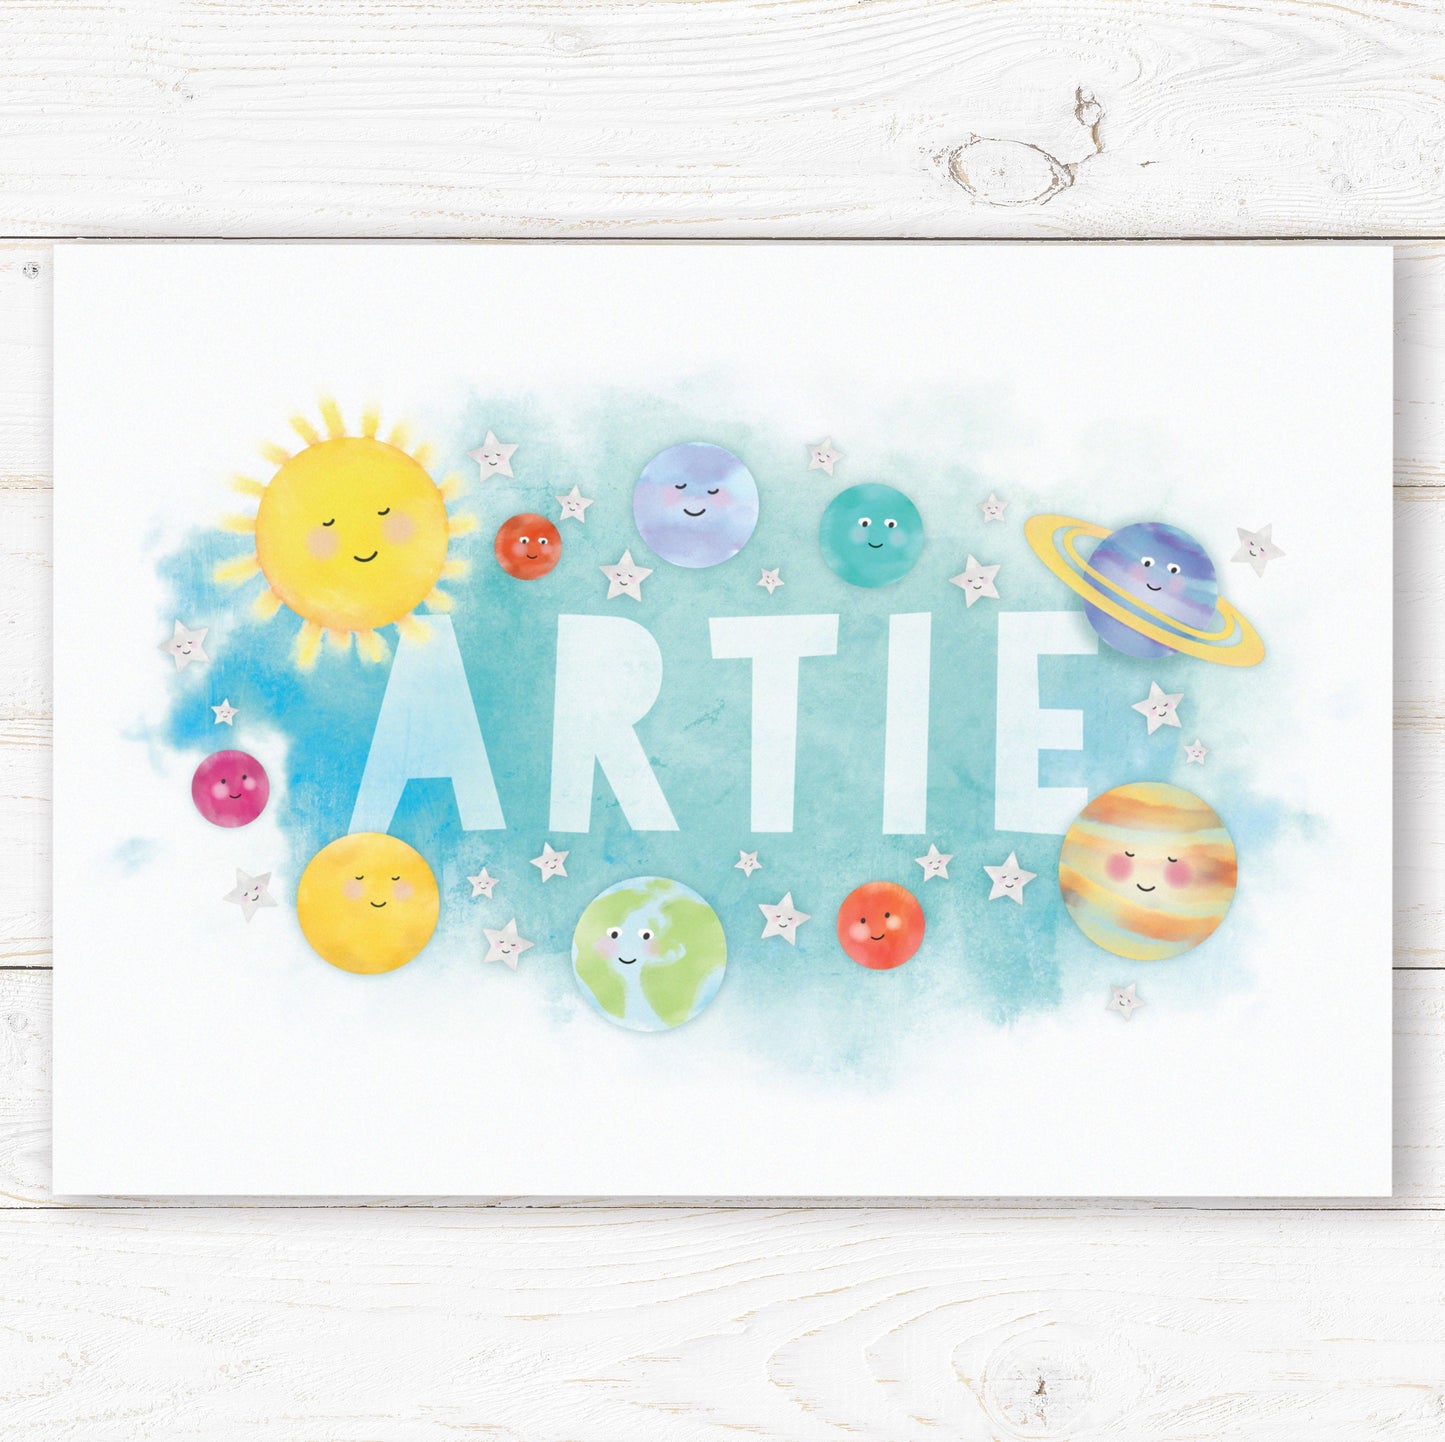 Solar System Name Print. Nursery Childs Bedroom. New Baby Gift. Personalised Name Print. Child's Birthday Present. Cute Space Theme Print.